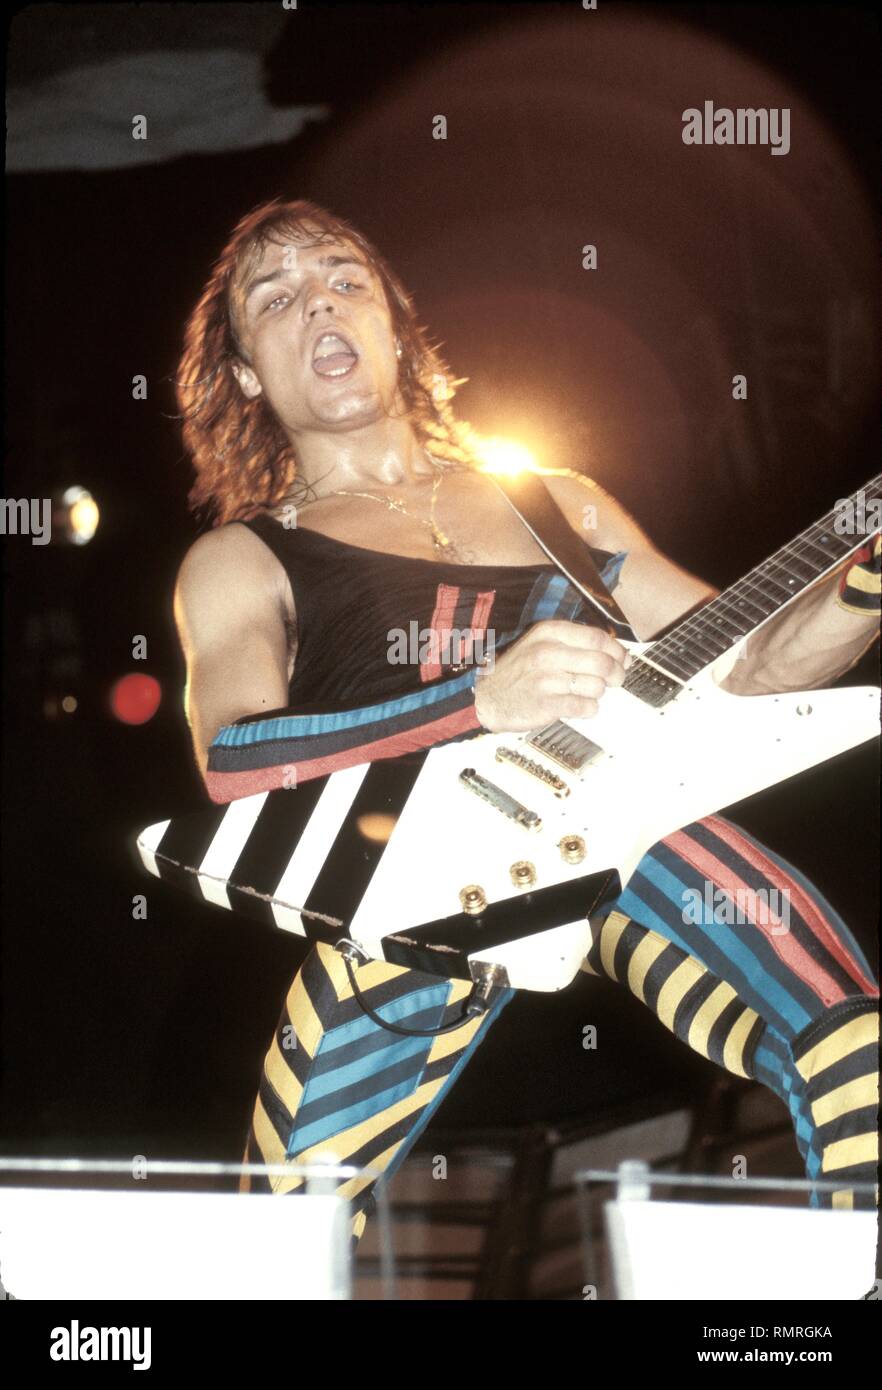 Singer, songwriter and guitarist Matthias Jabs of the heavy metal band The Scorpions is shown performing on stage at Rock in Rio I back in 1985. Stock Photo